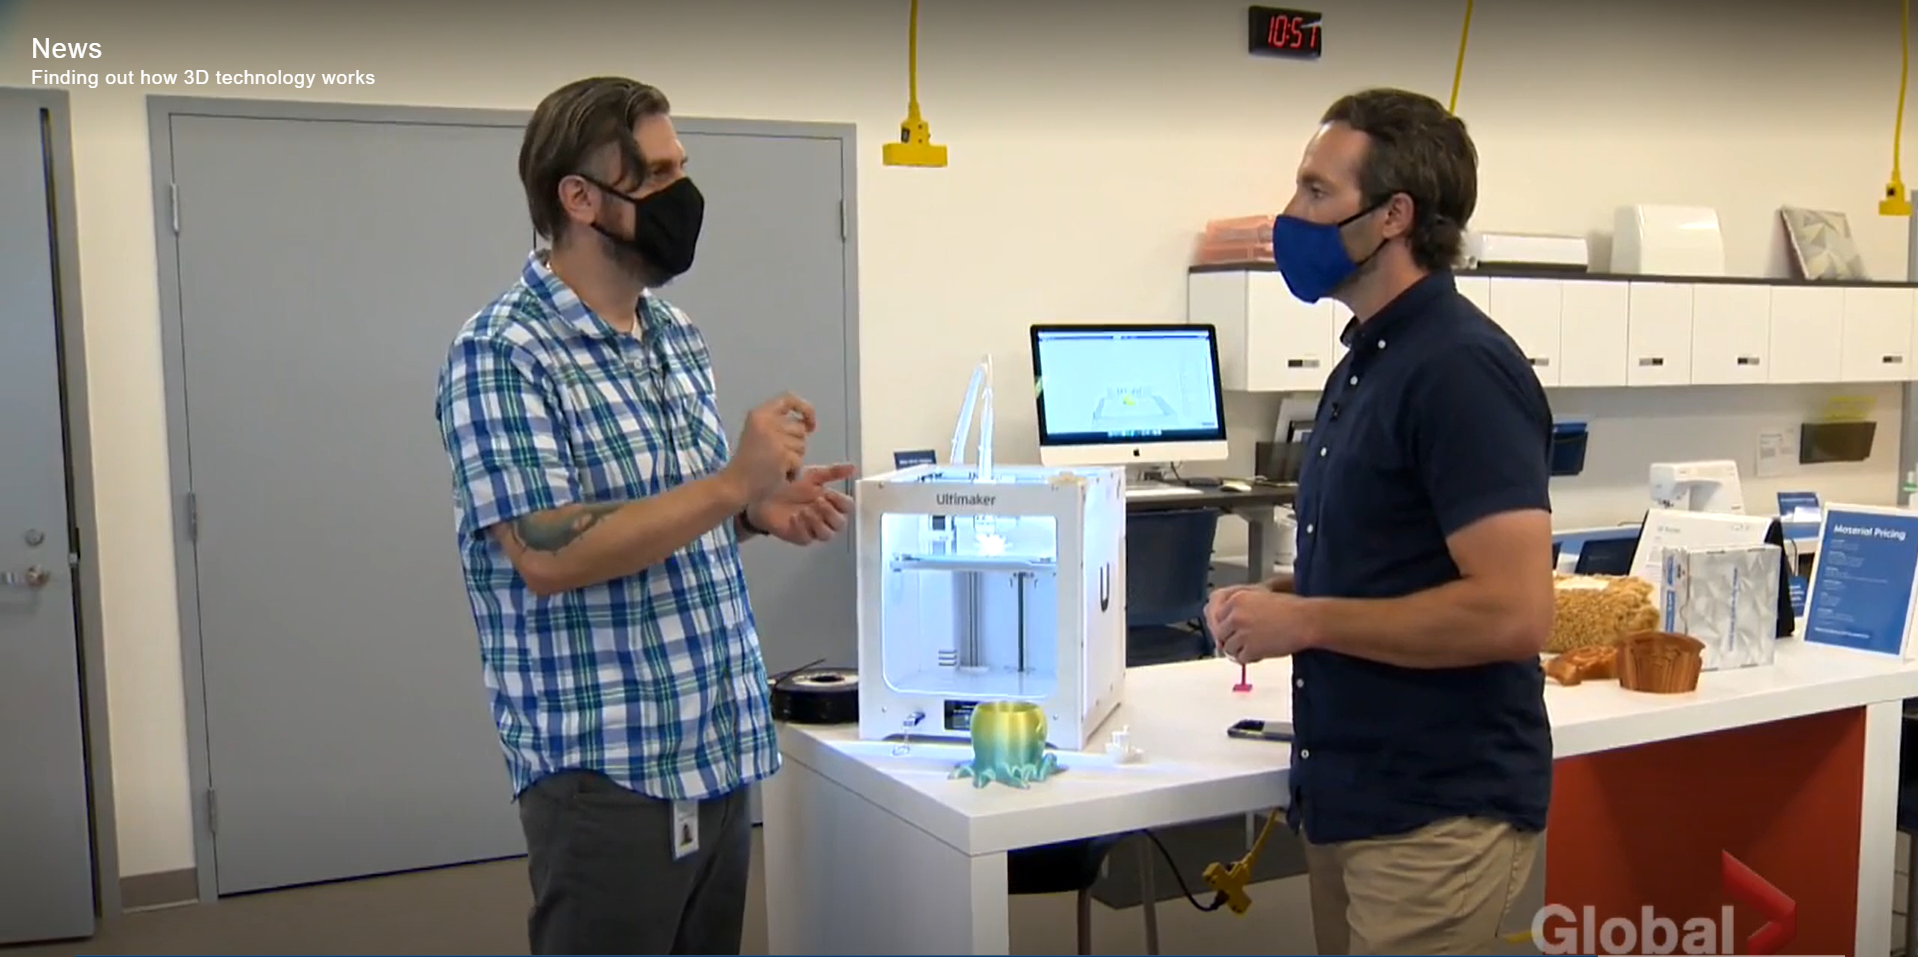 Global News visits the Glen Abbey Creation Zone to learn more about 3D printing  image